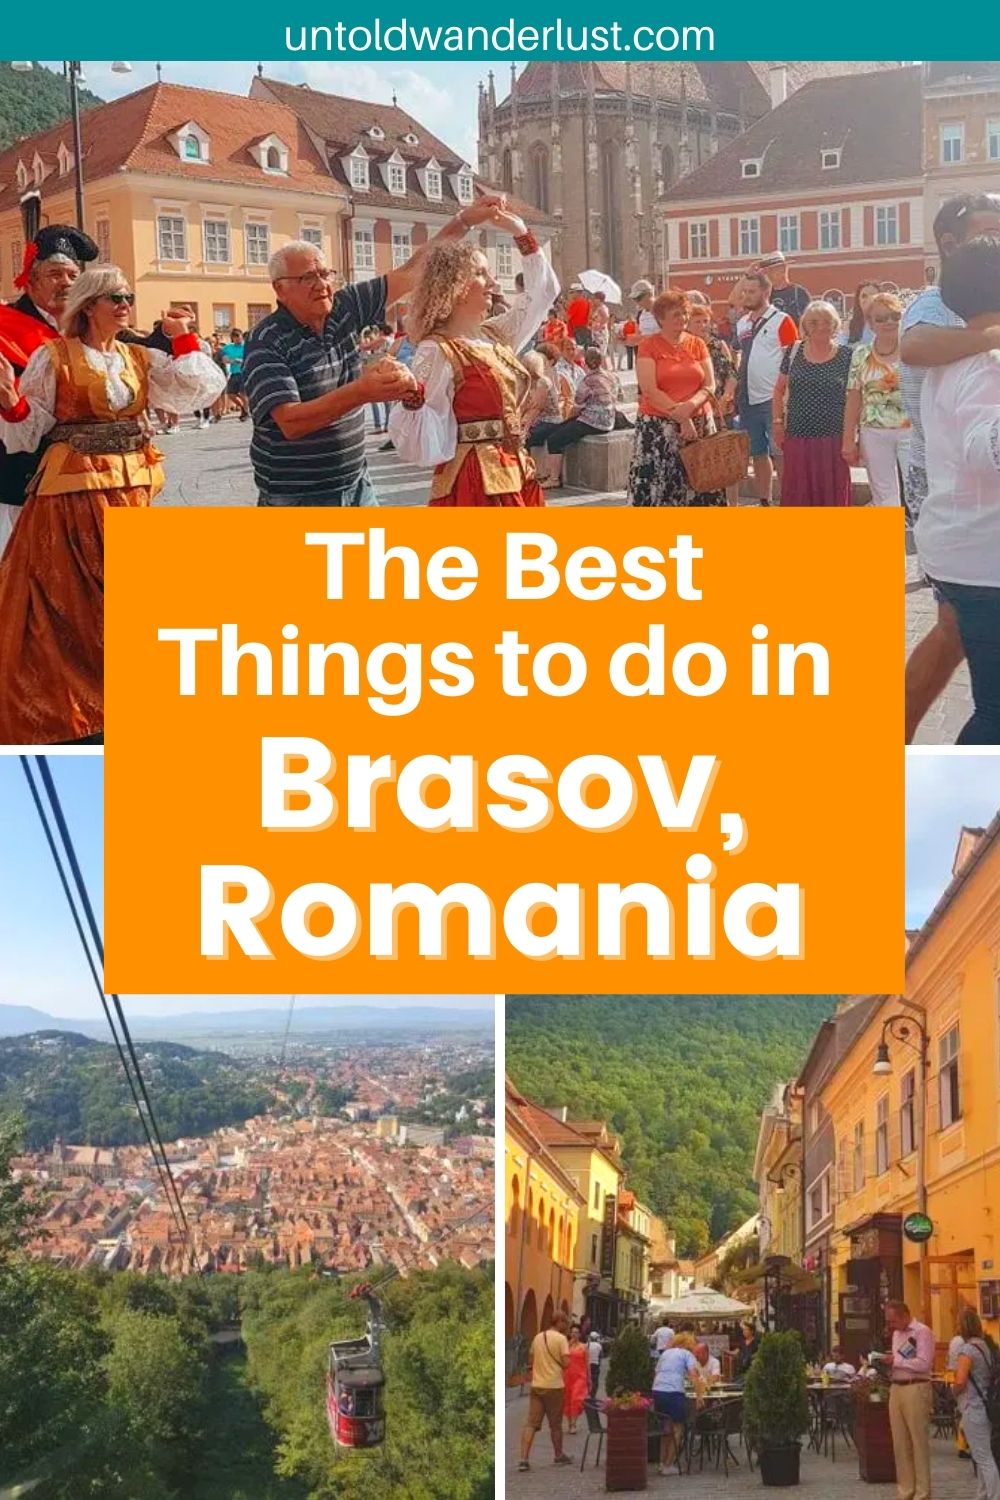 The Best Things to do in Brasov, Romania